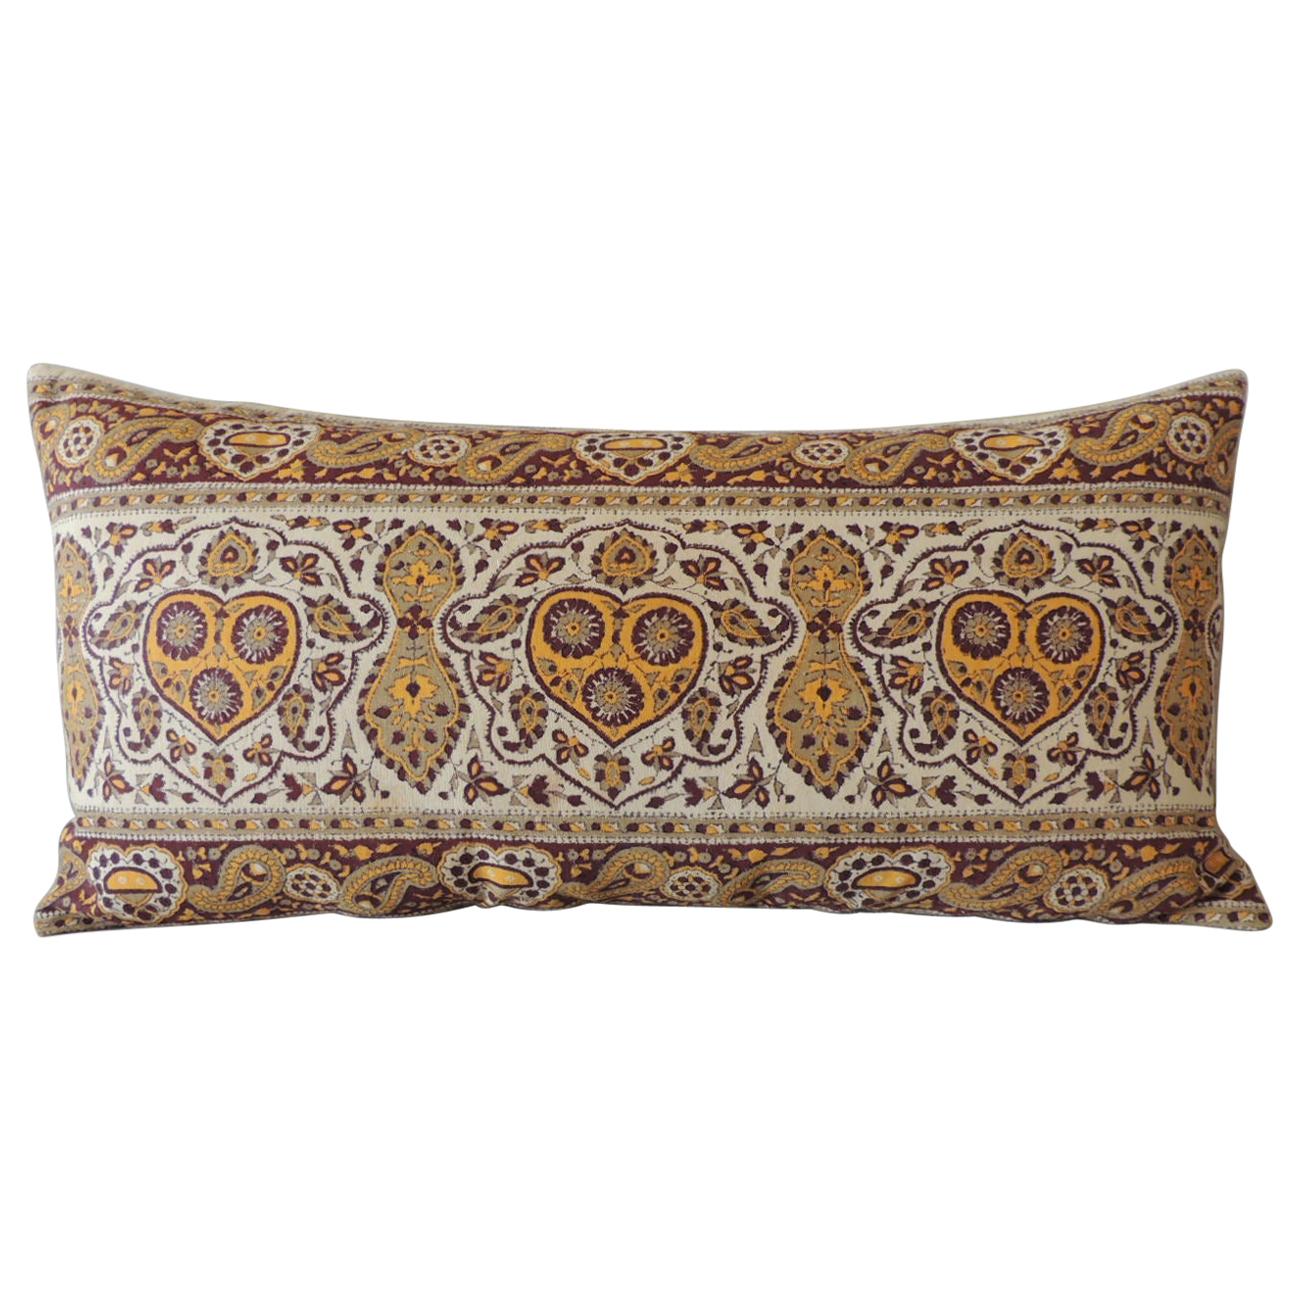 Vintage Brown and Yellow Paisley Long Bolster Decorative Pillow